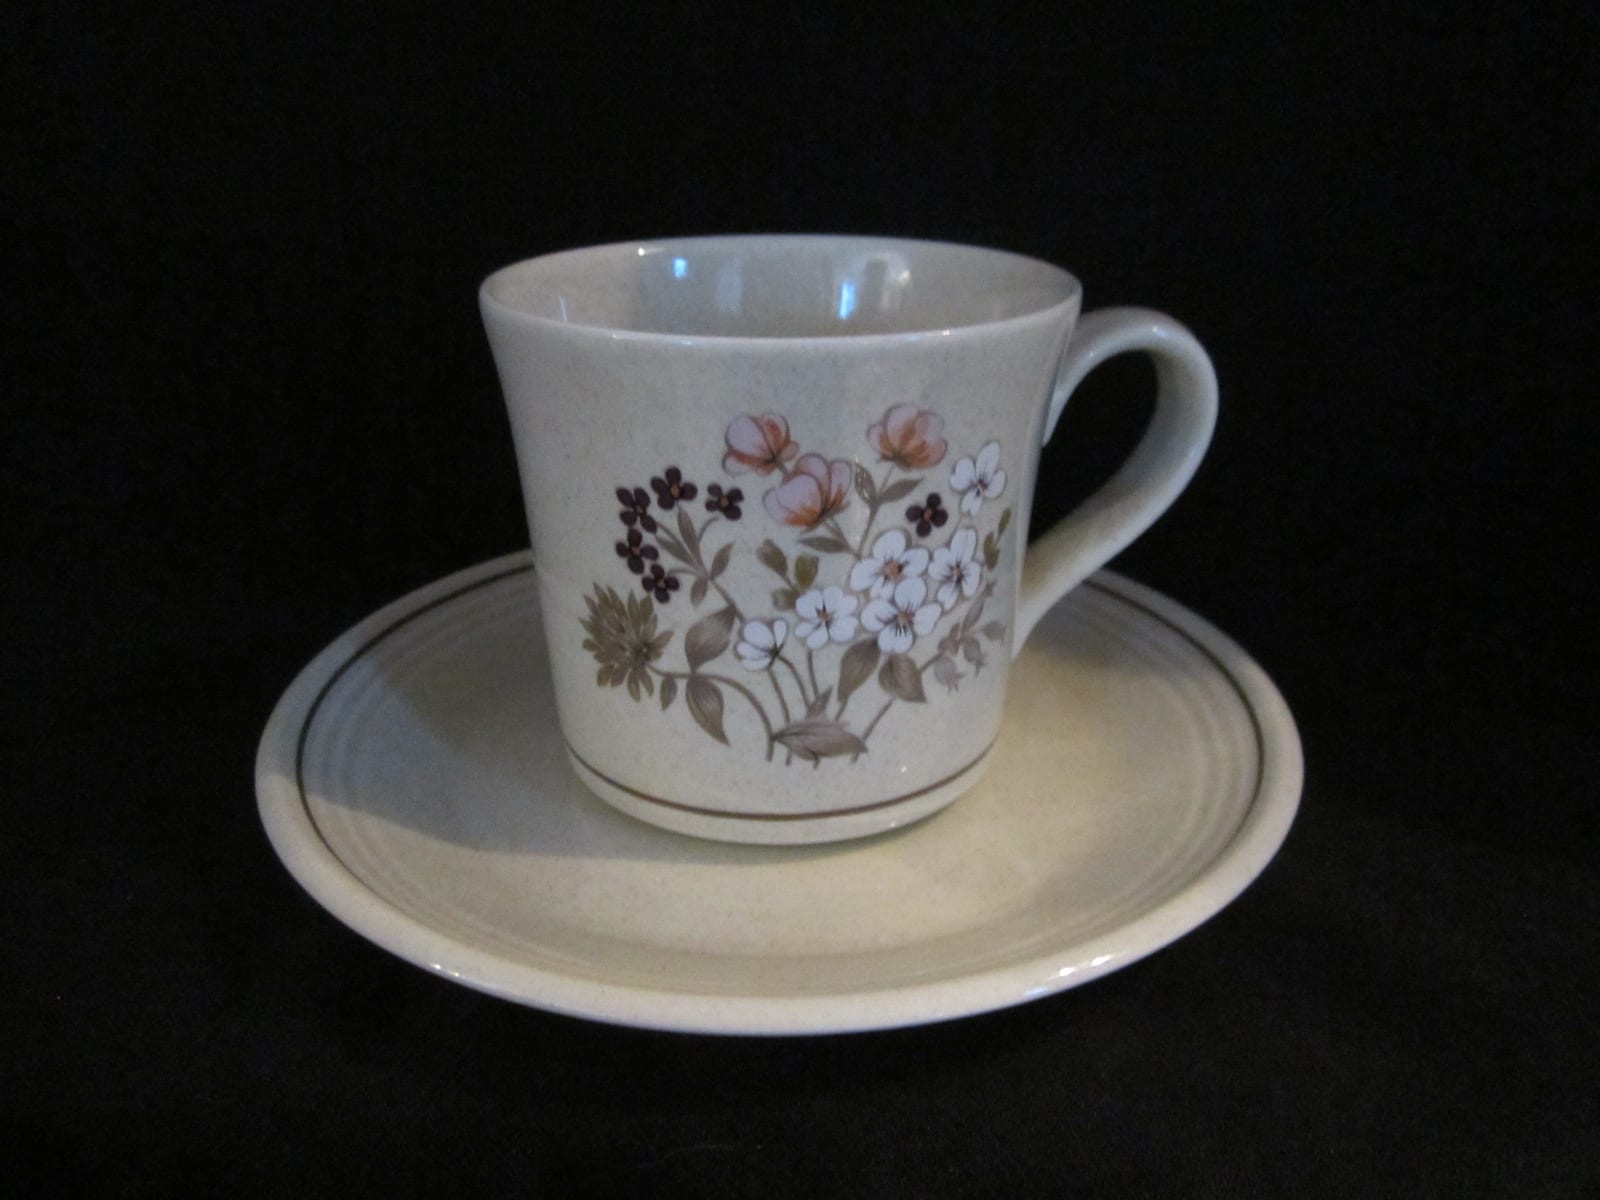 Vintage Royal Doulton "Bredon Hill" Coffee Cups and Saucers Teacups 